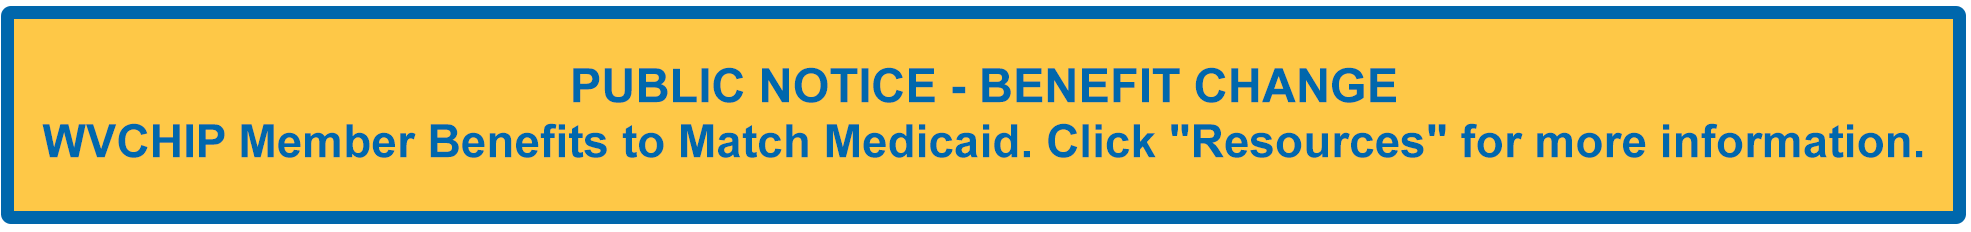 Benefit Change - WV CHIP member benefits to match medicaid.